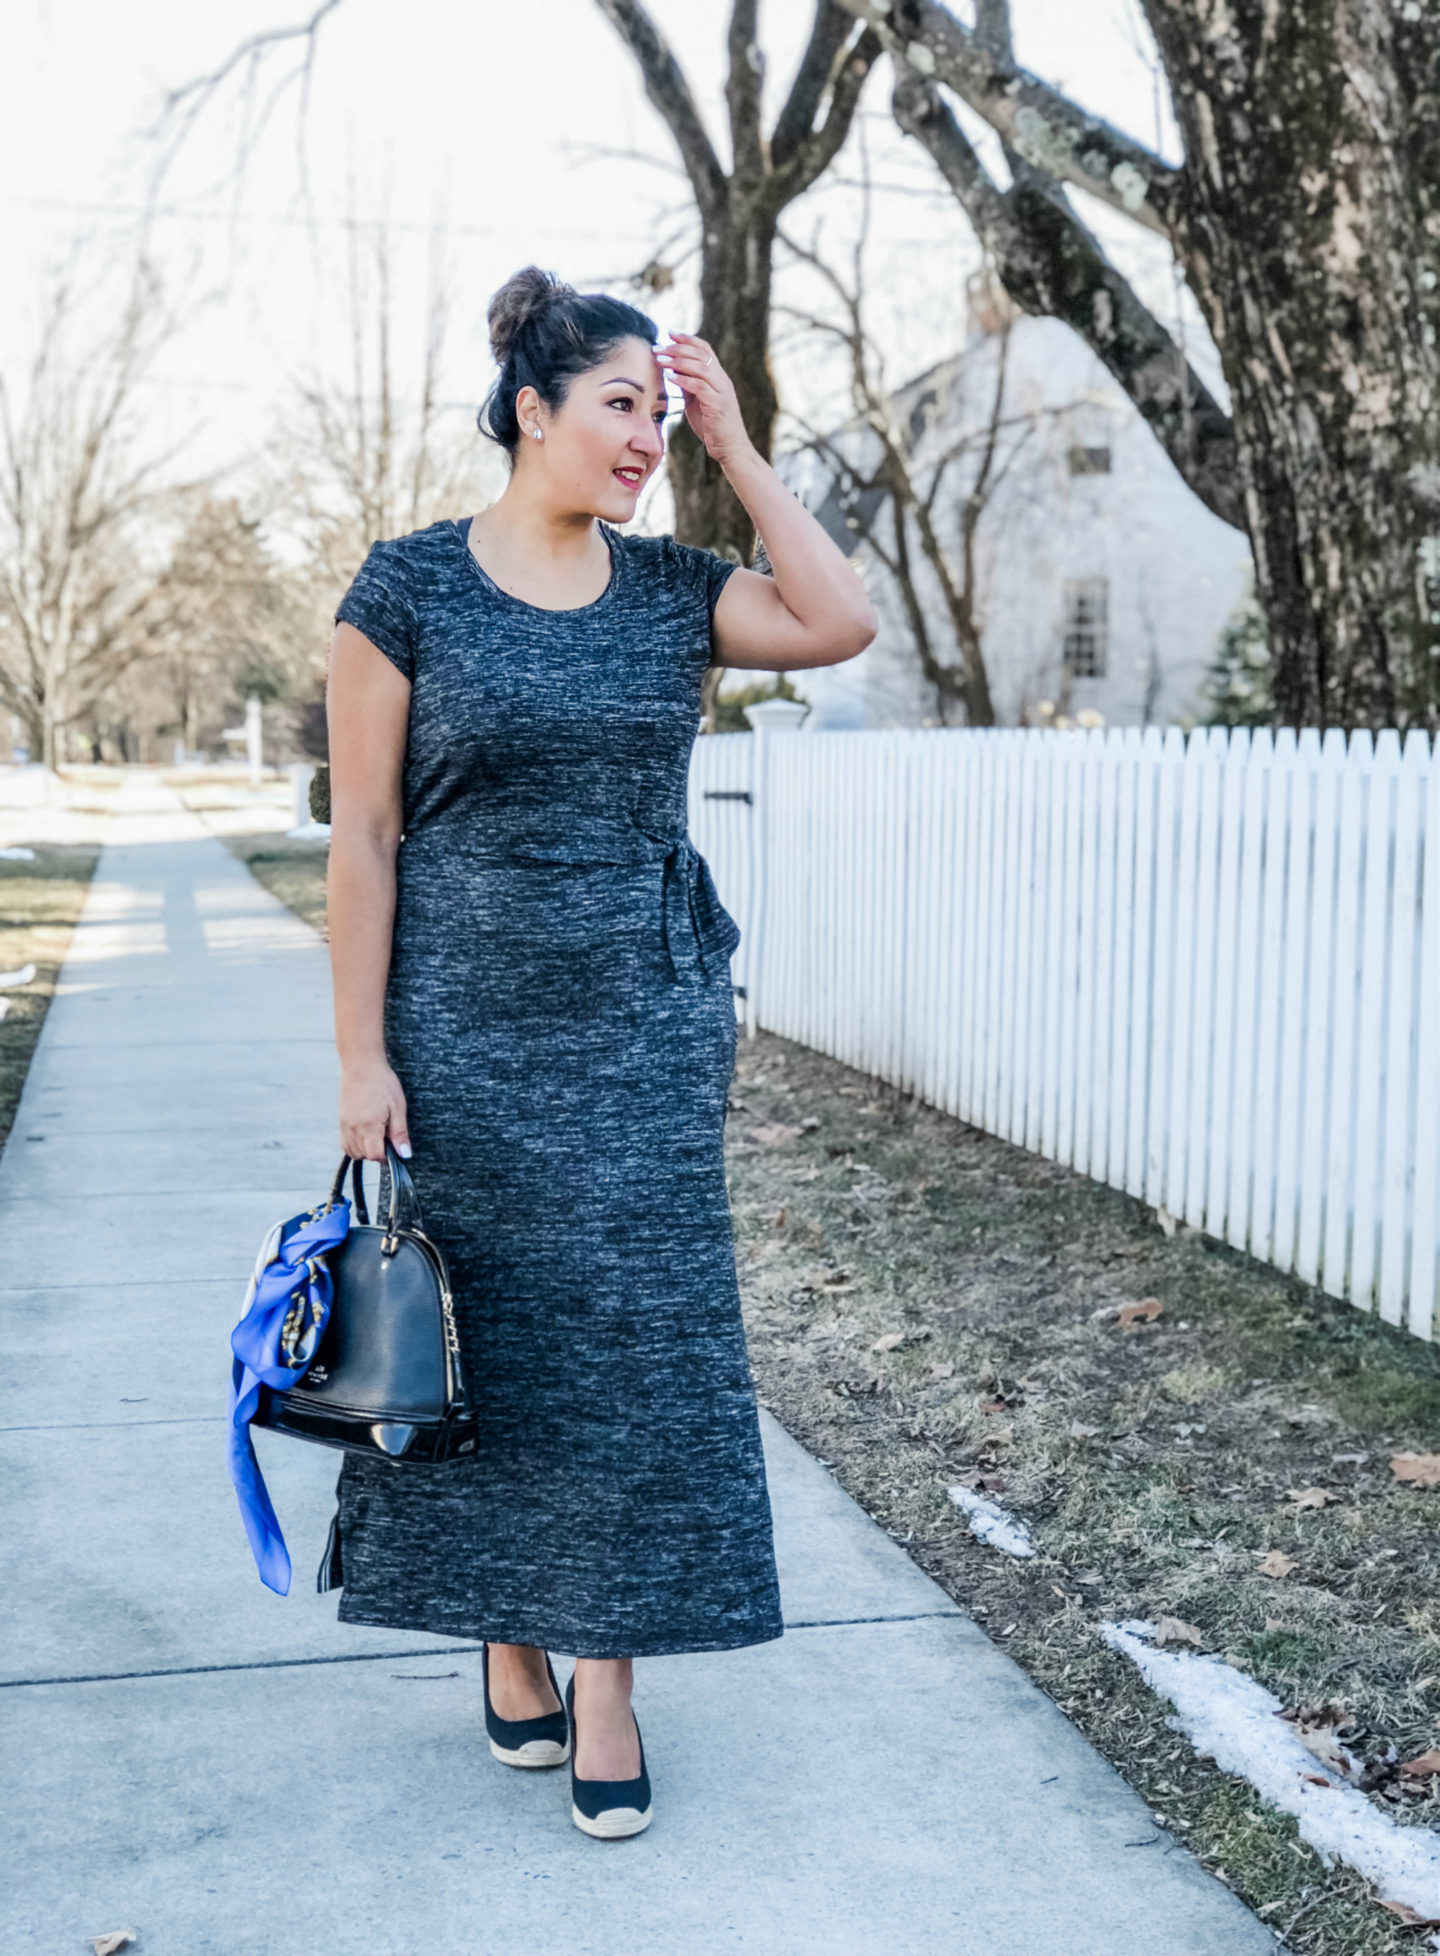 Dress For Success with Talbots & O, The Oprah Magazine! - Rosa Diana